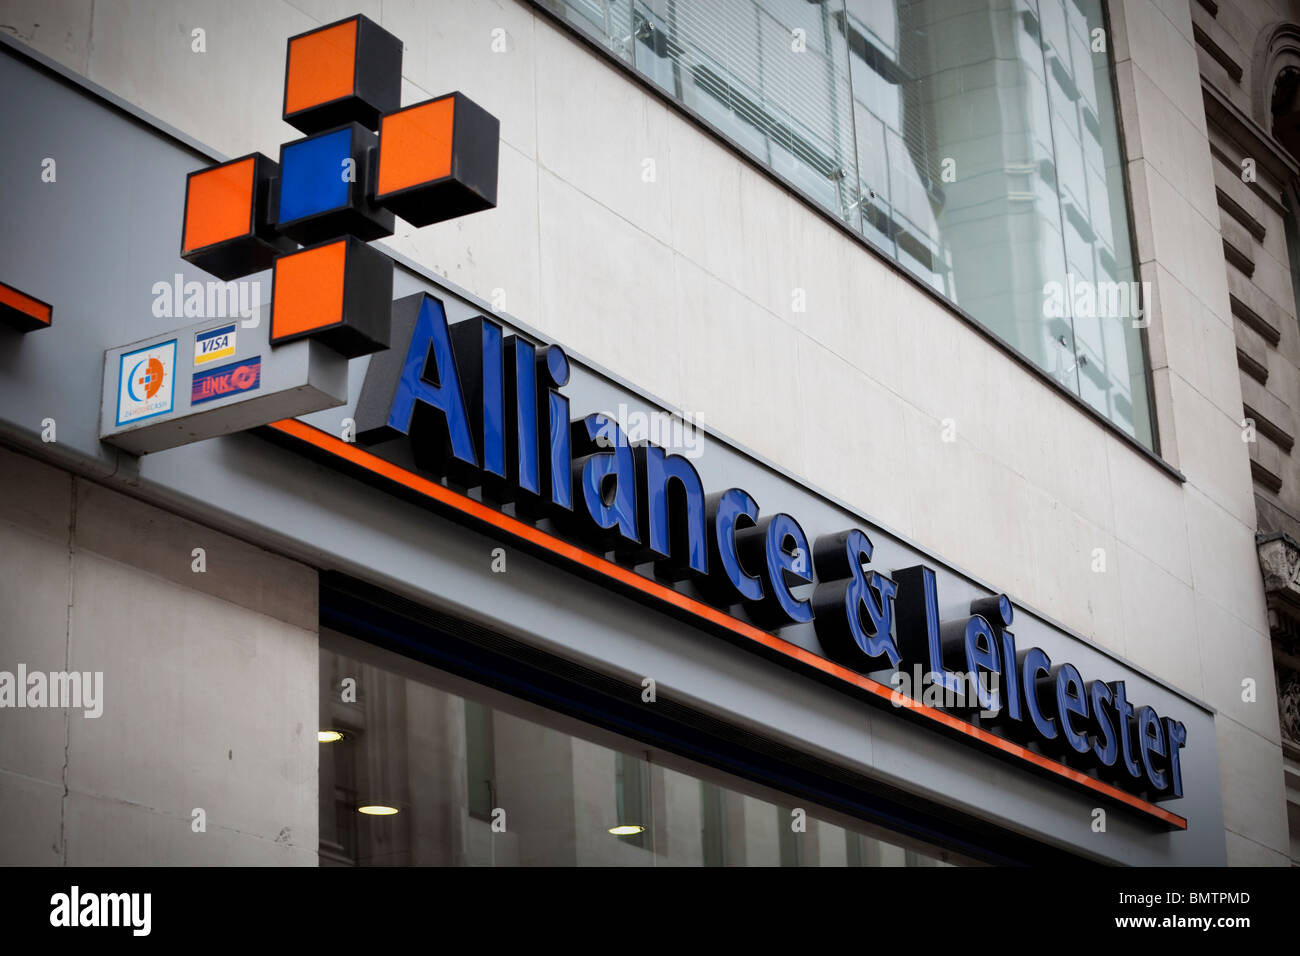 Alliance and Leicester bank branch in London, UK Stock Photo - Alamy